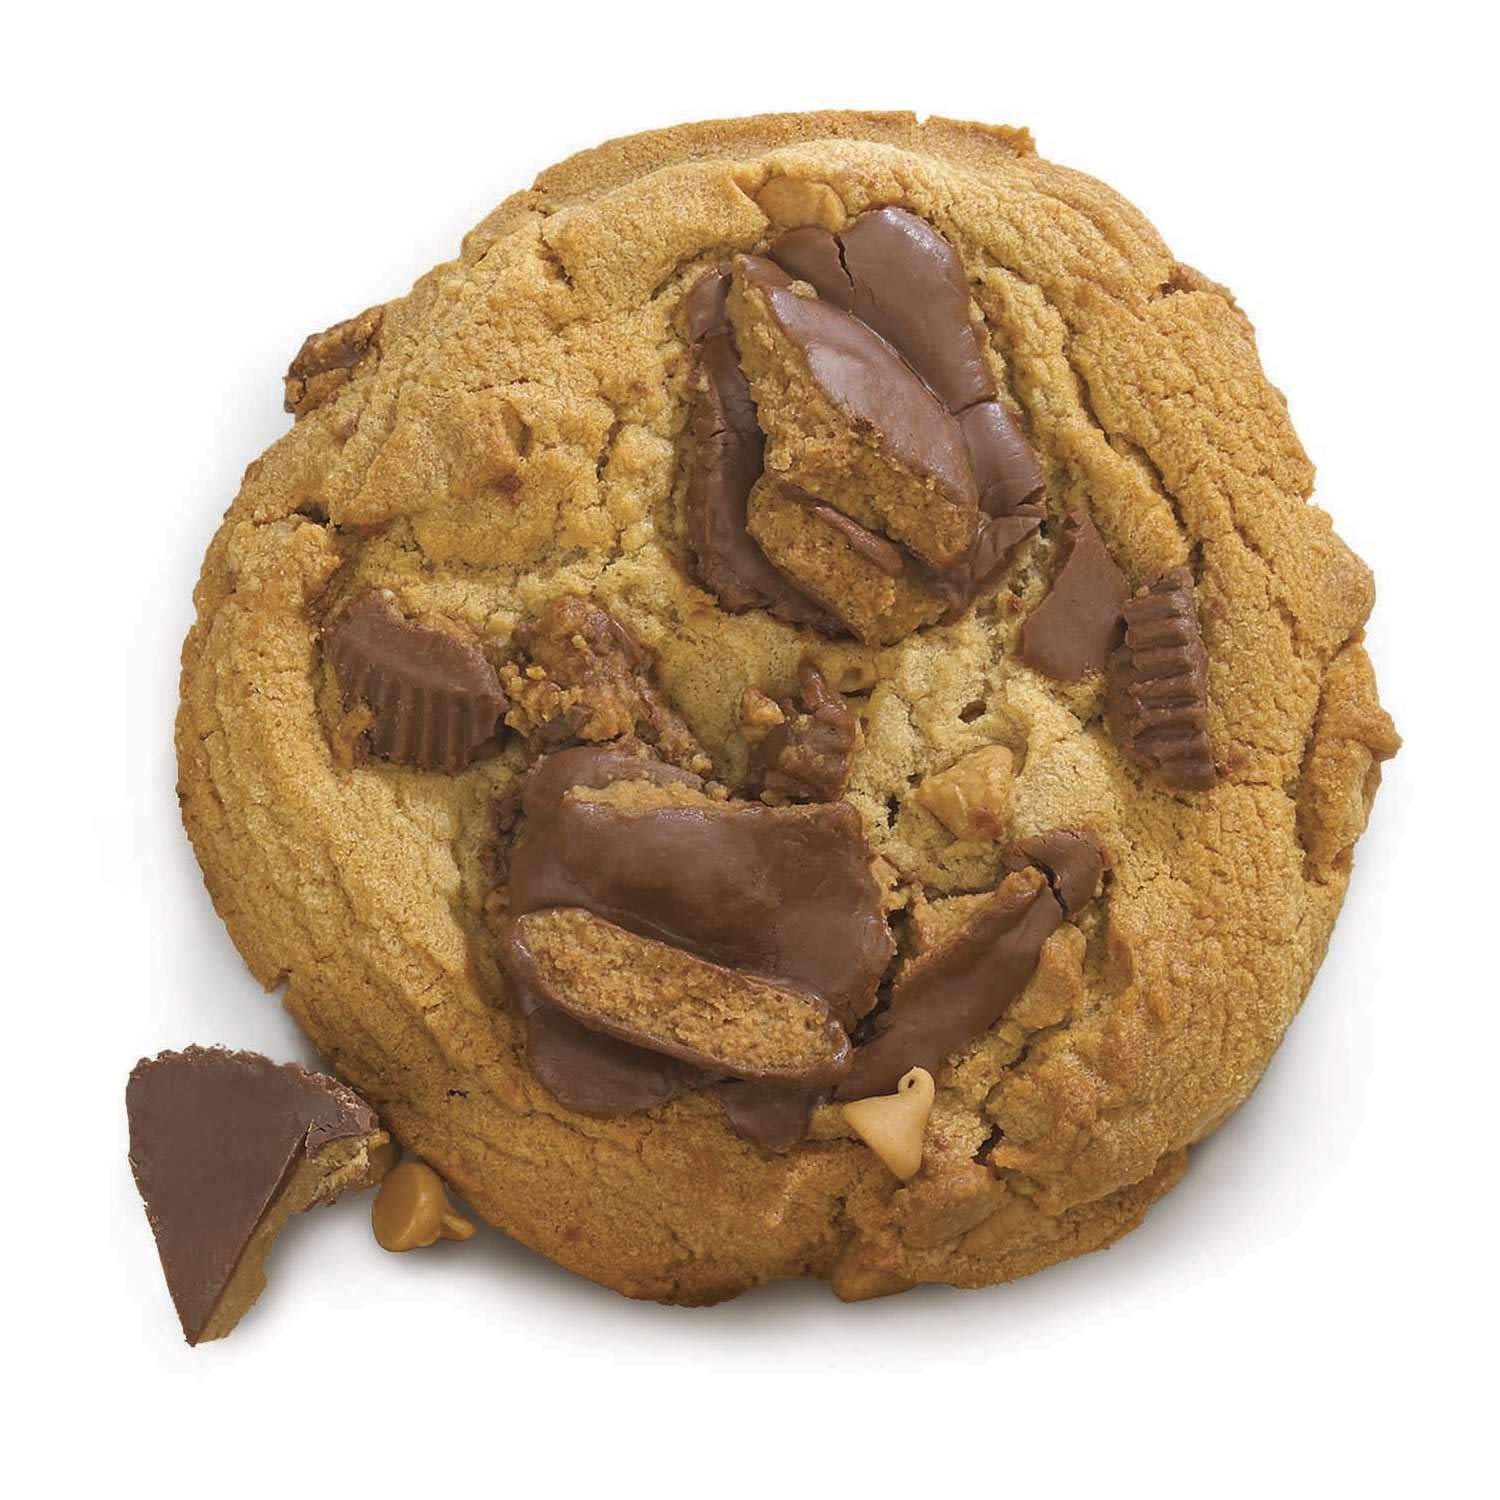 David's Cookies Peanut Butter Reese's Cookie Dough 4.5 Oz Pack